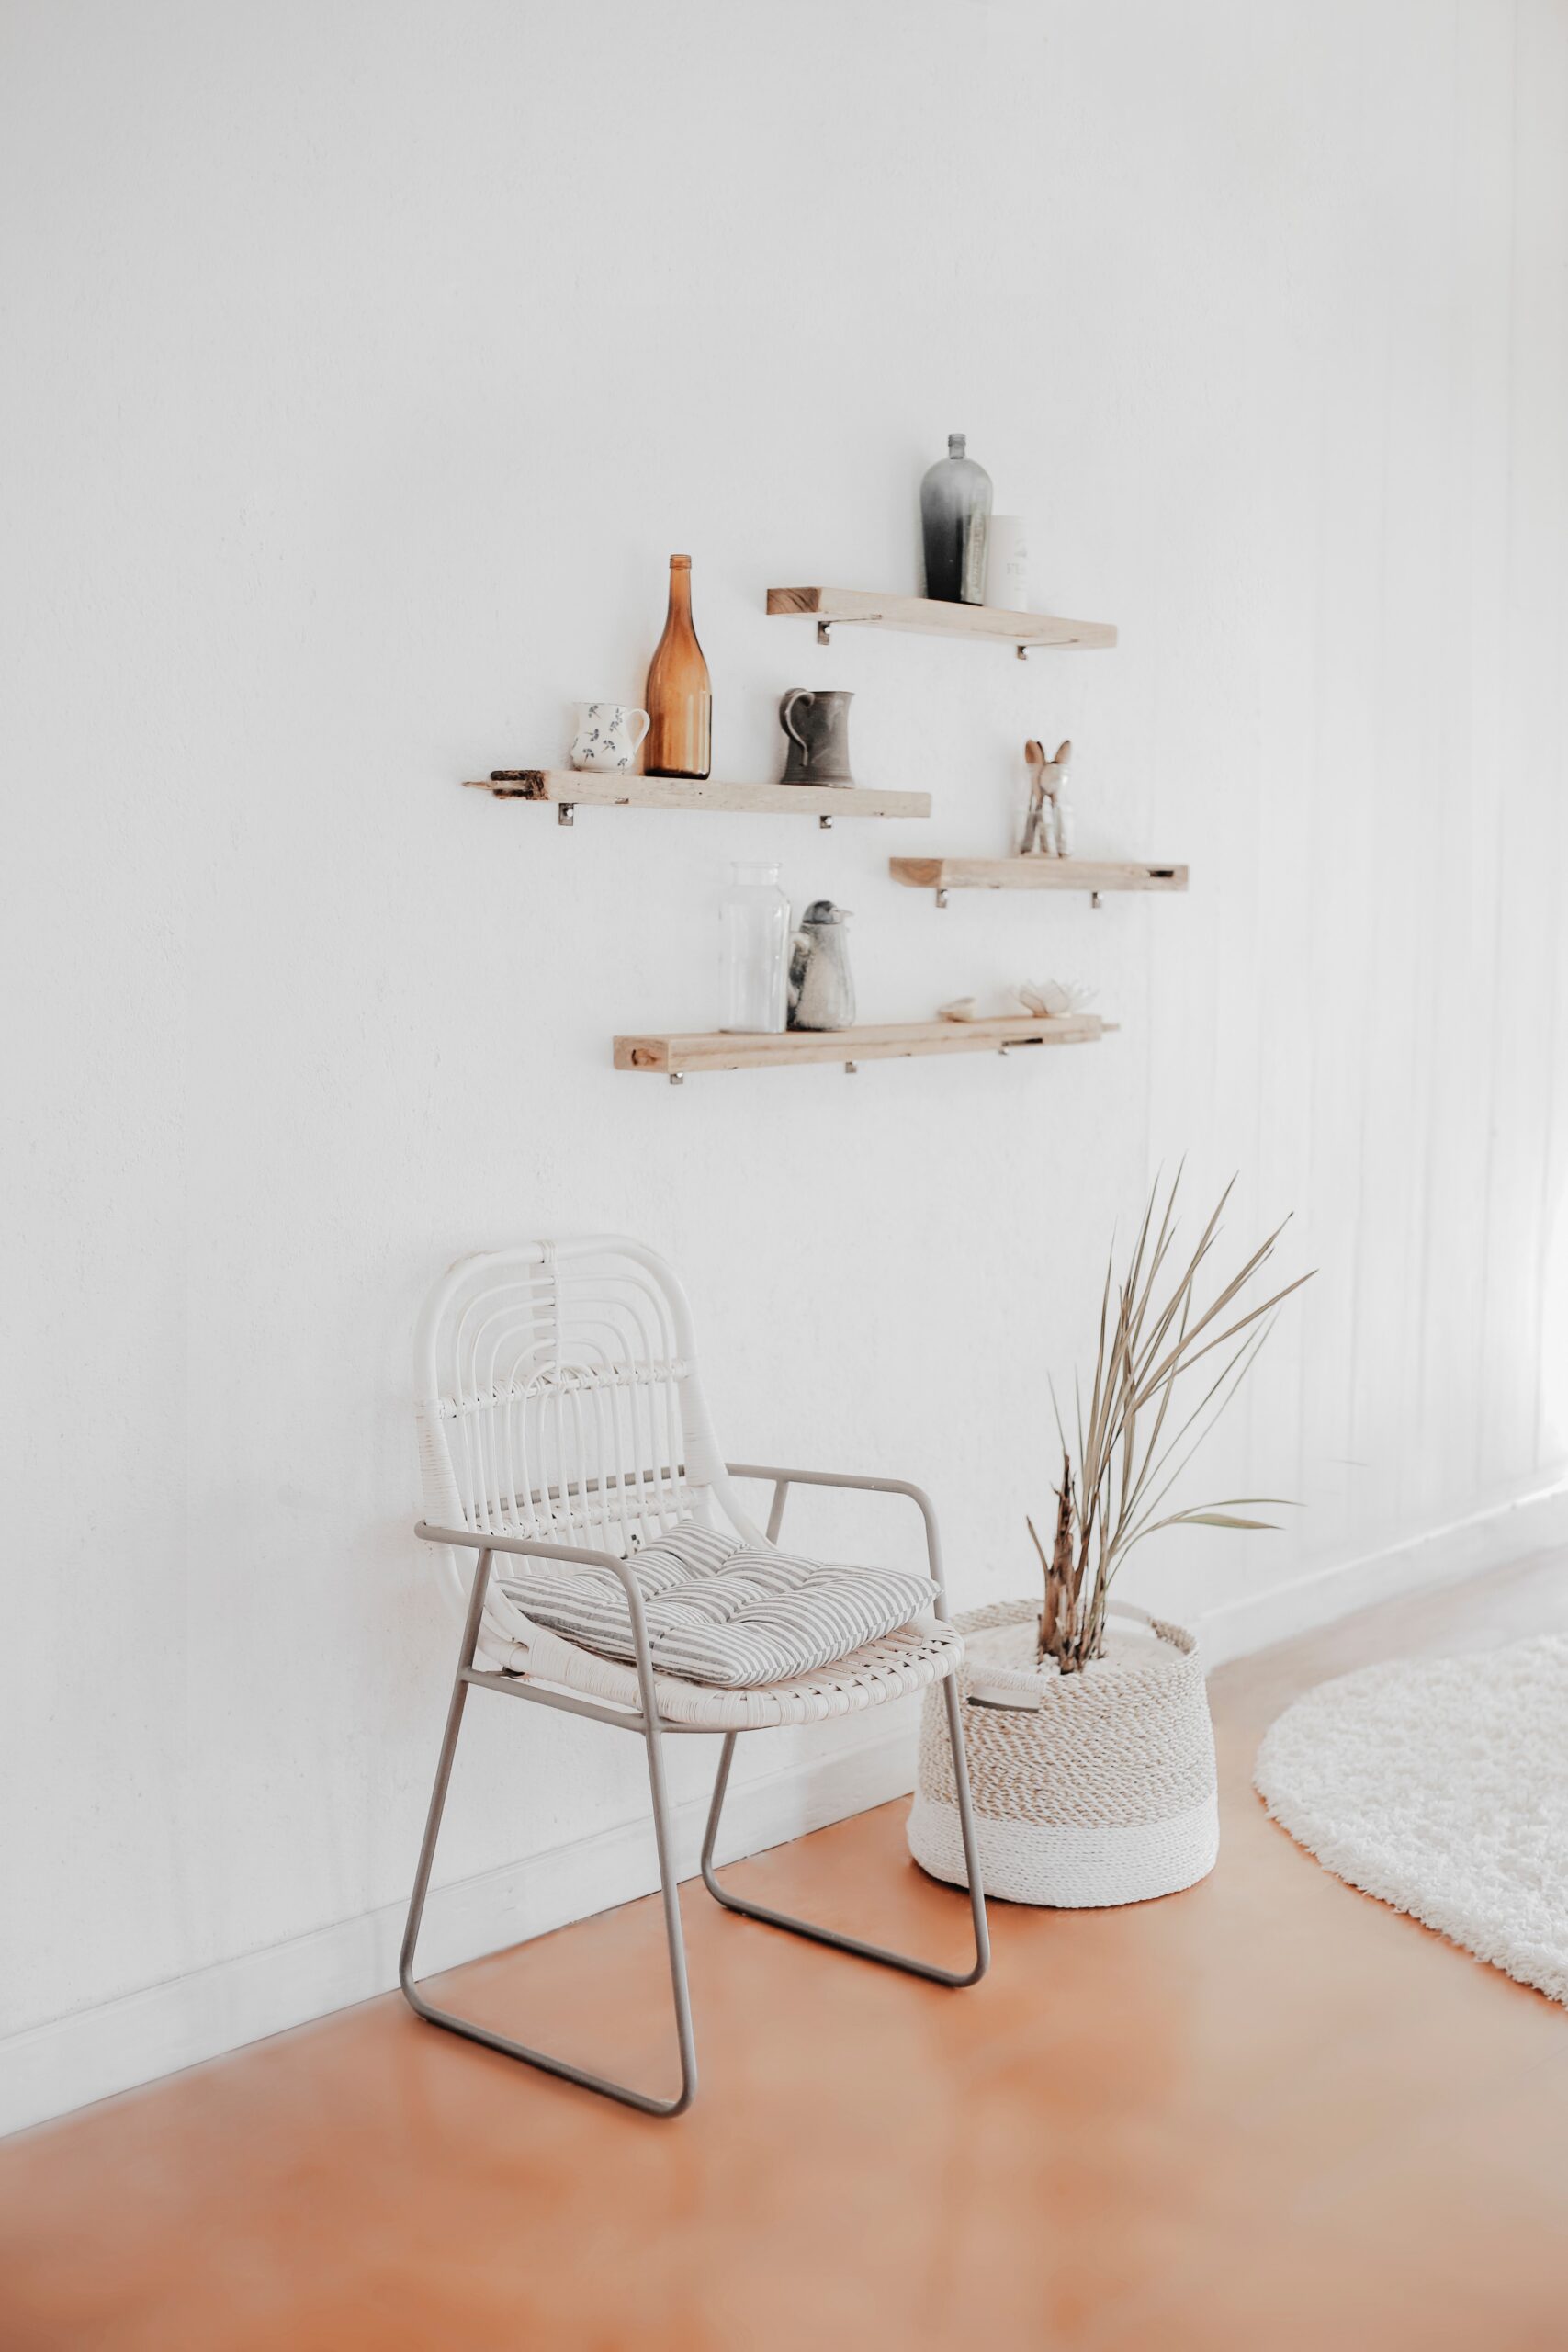 Chair, rug, plant and shelves